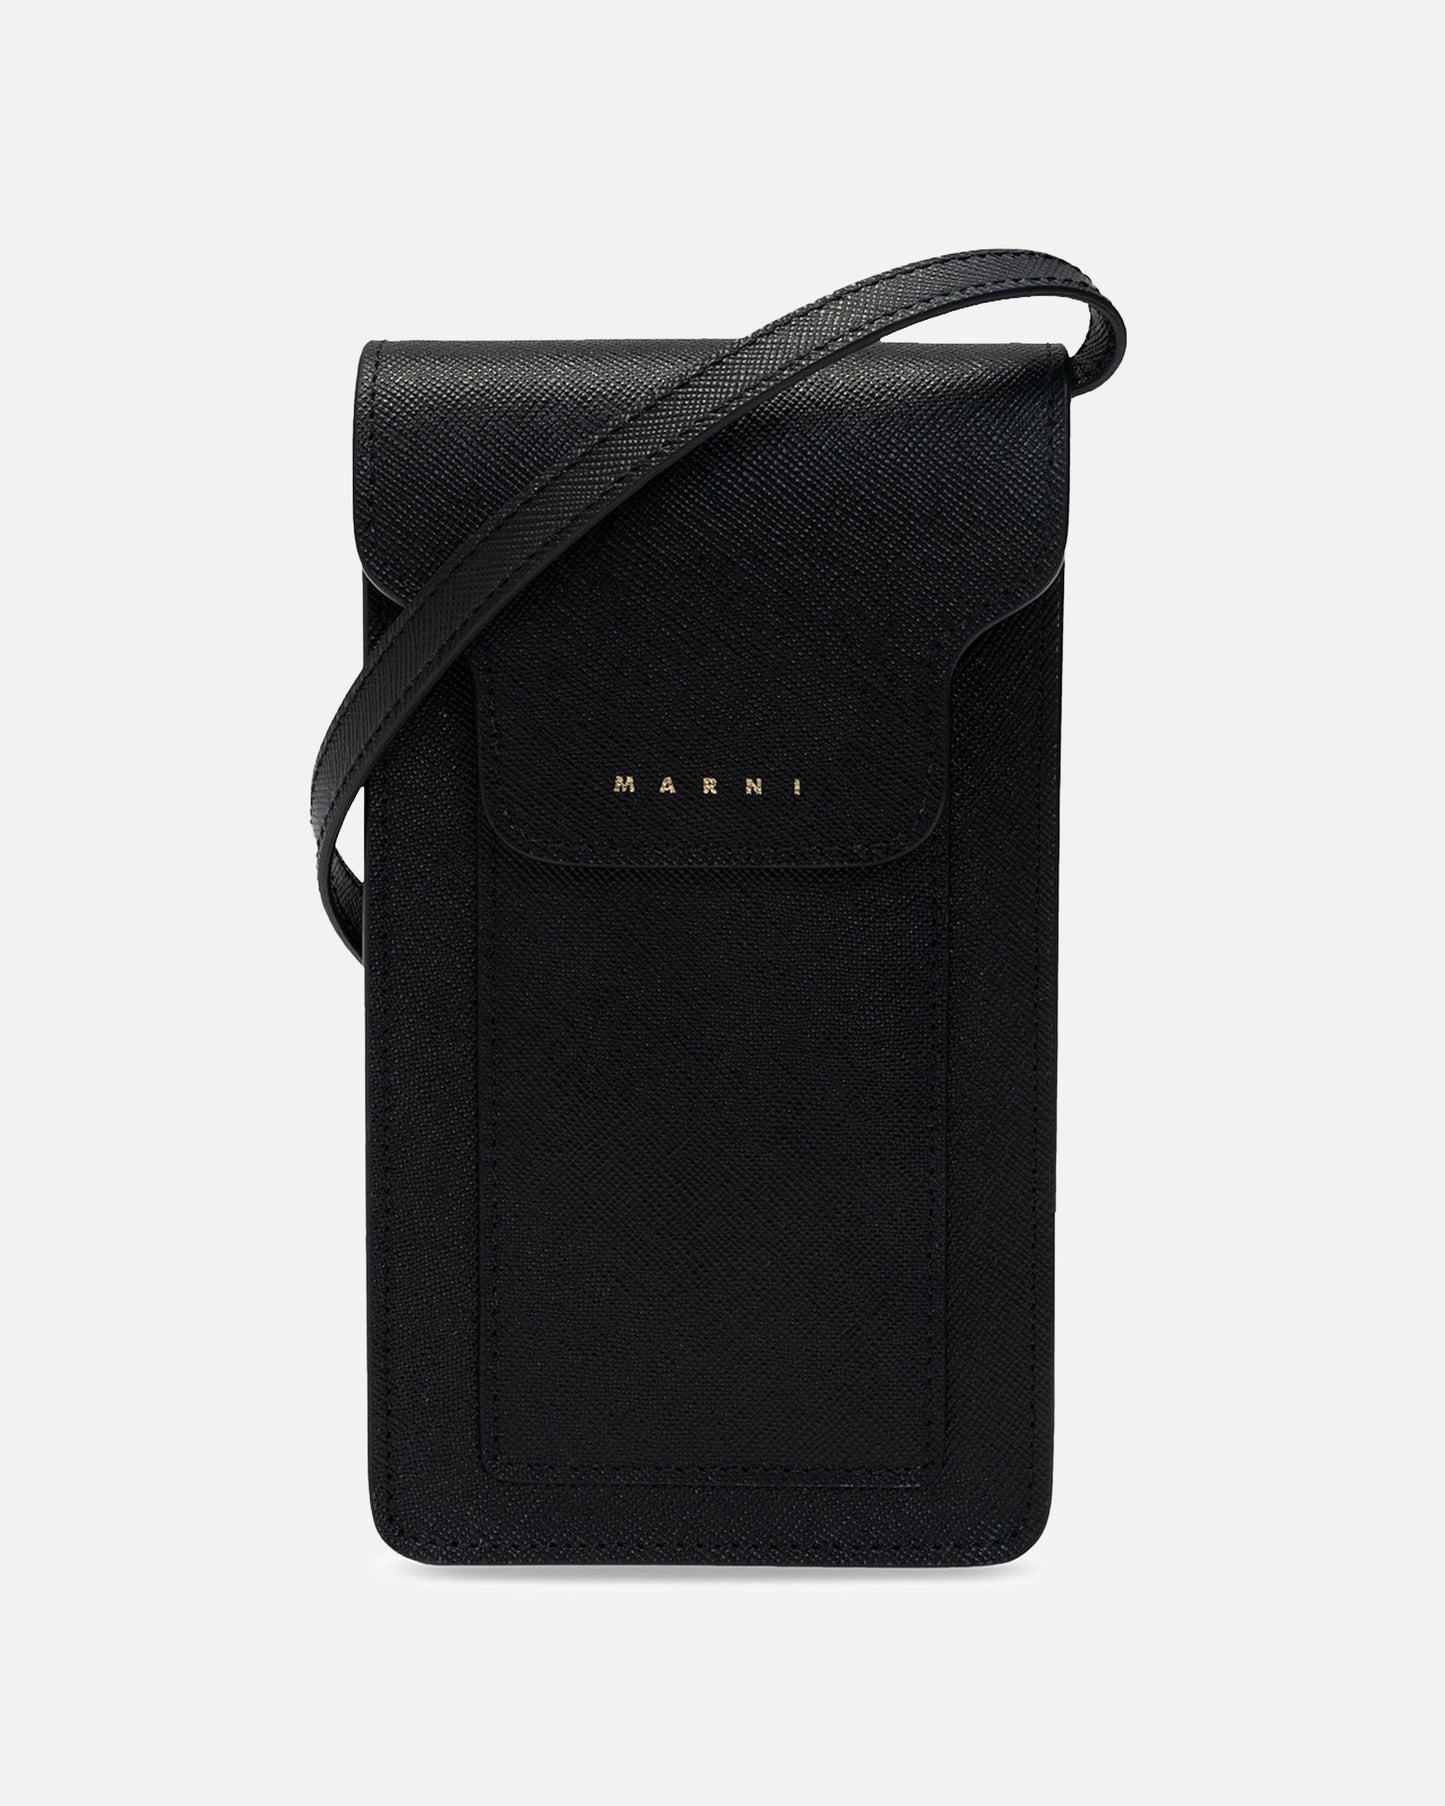 Marni Leather Goods Saffiano Leather Phone Case in Black